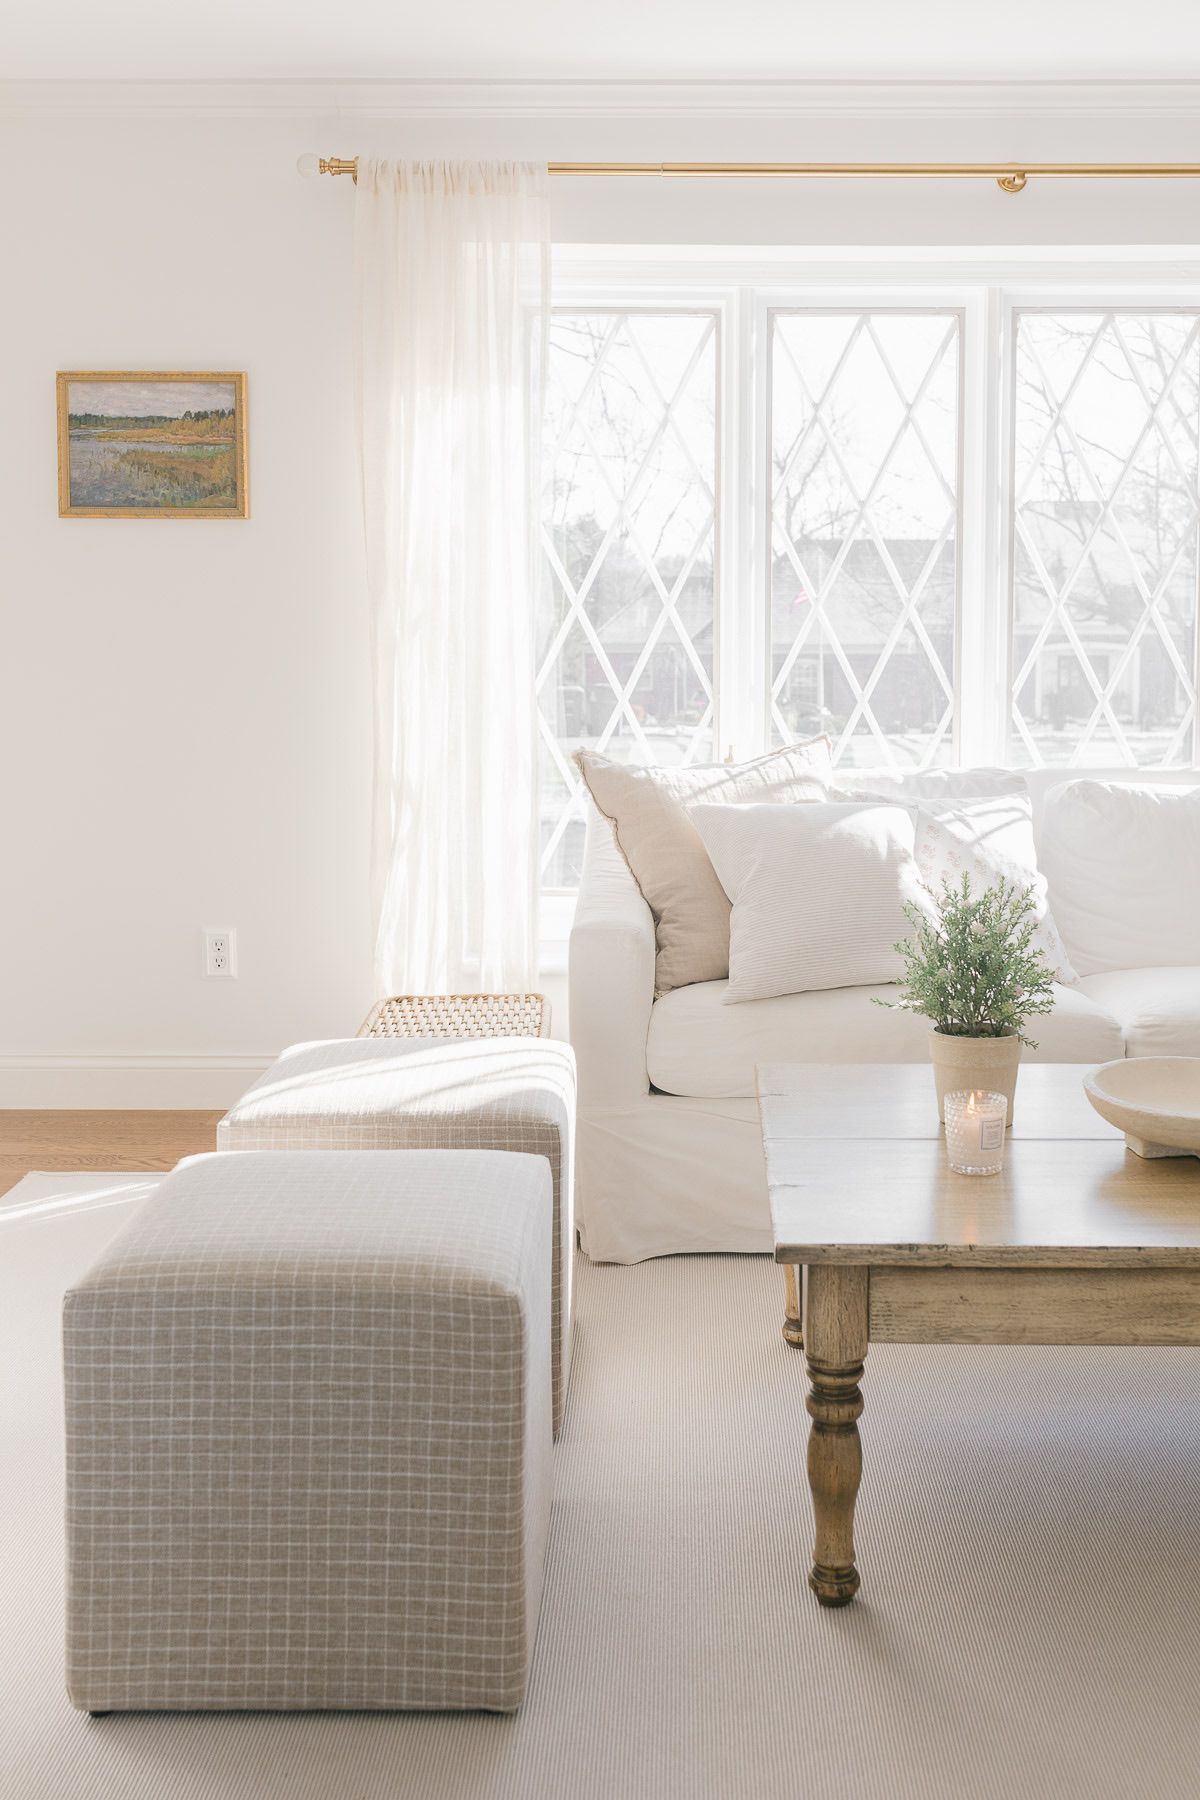 A white living room with a white Pottery Barn sofa